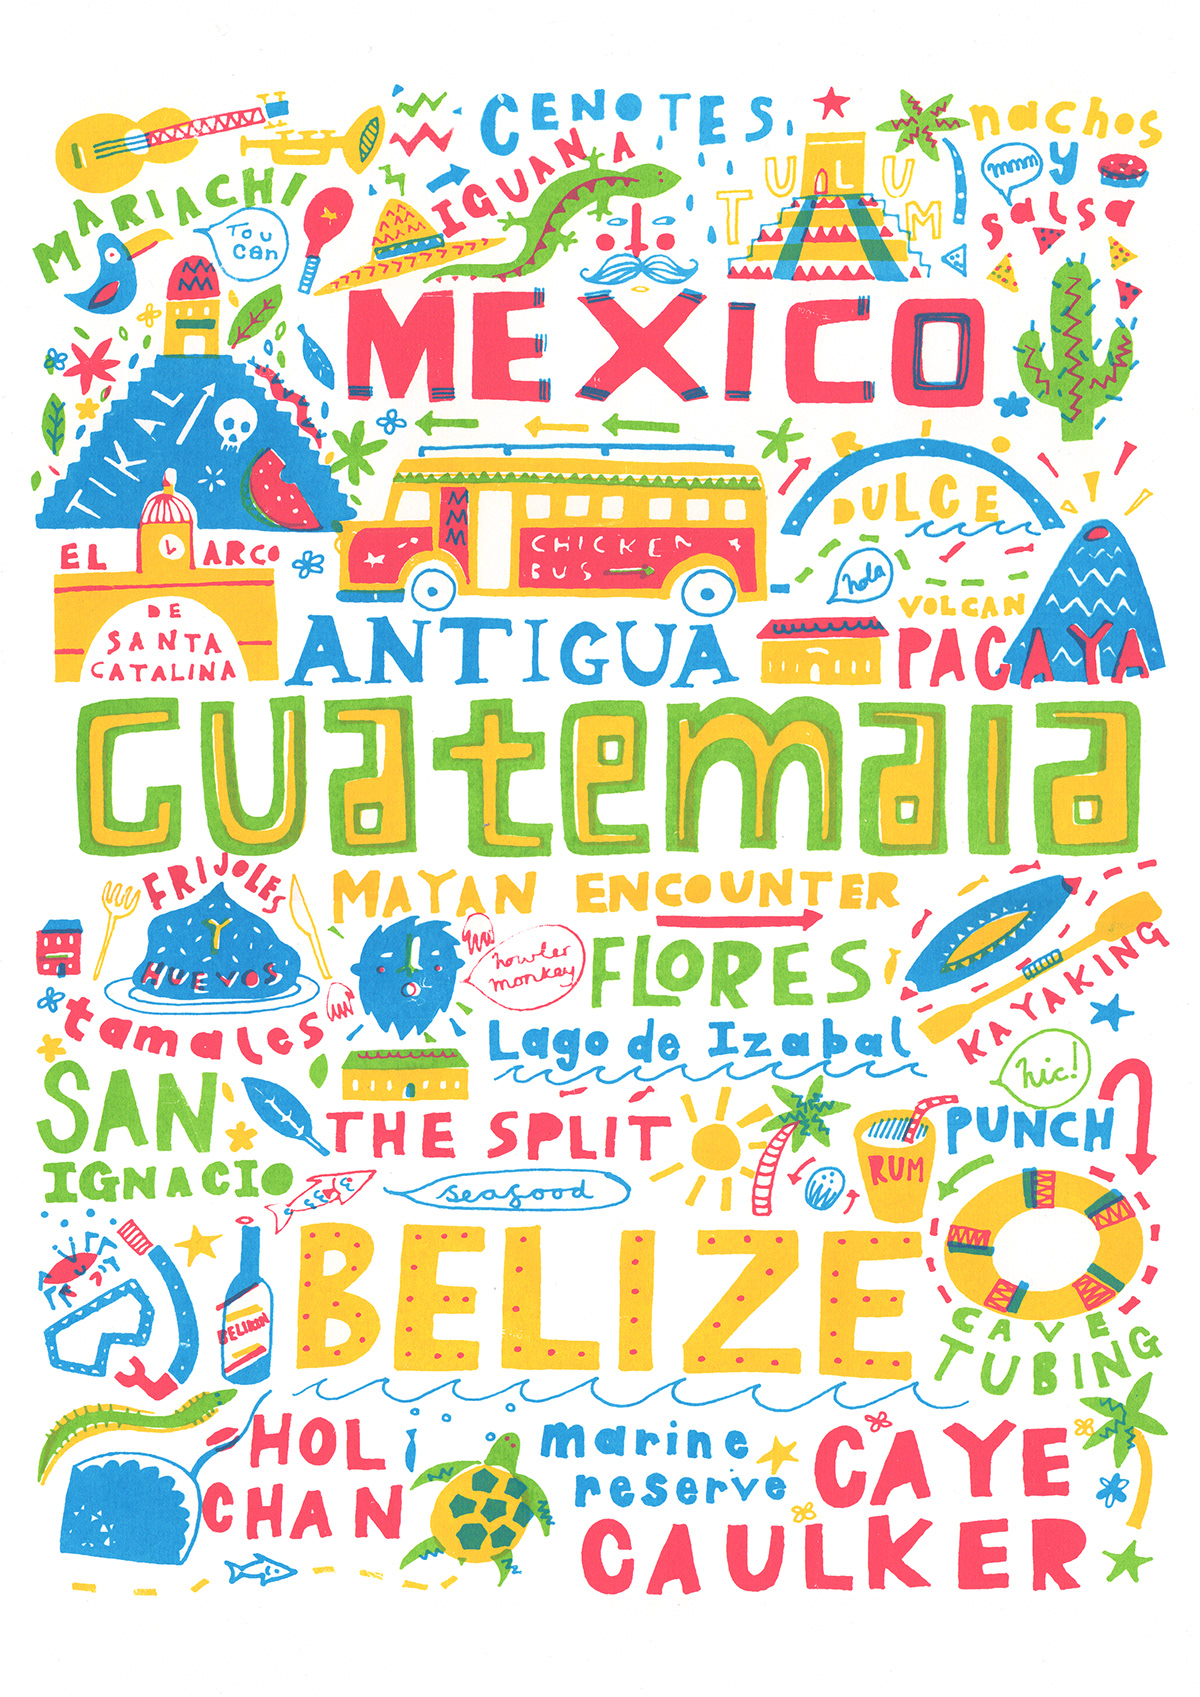 central america Guatemala belize mexico Travel font colour red blue green yellow